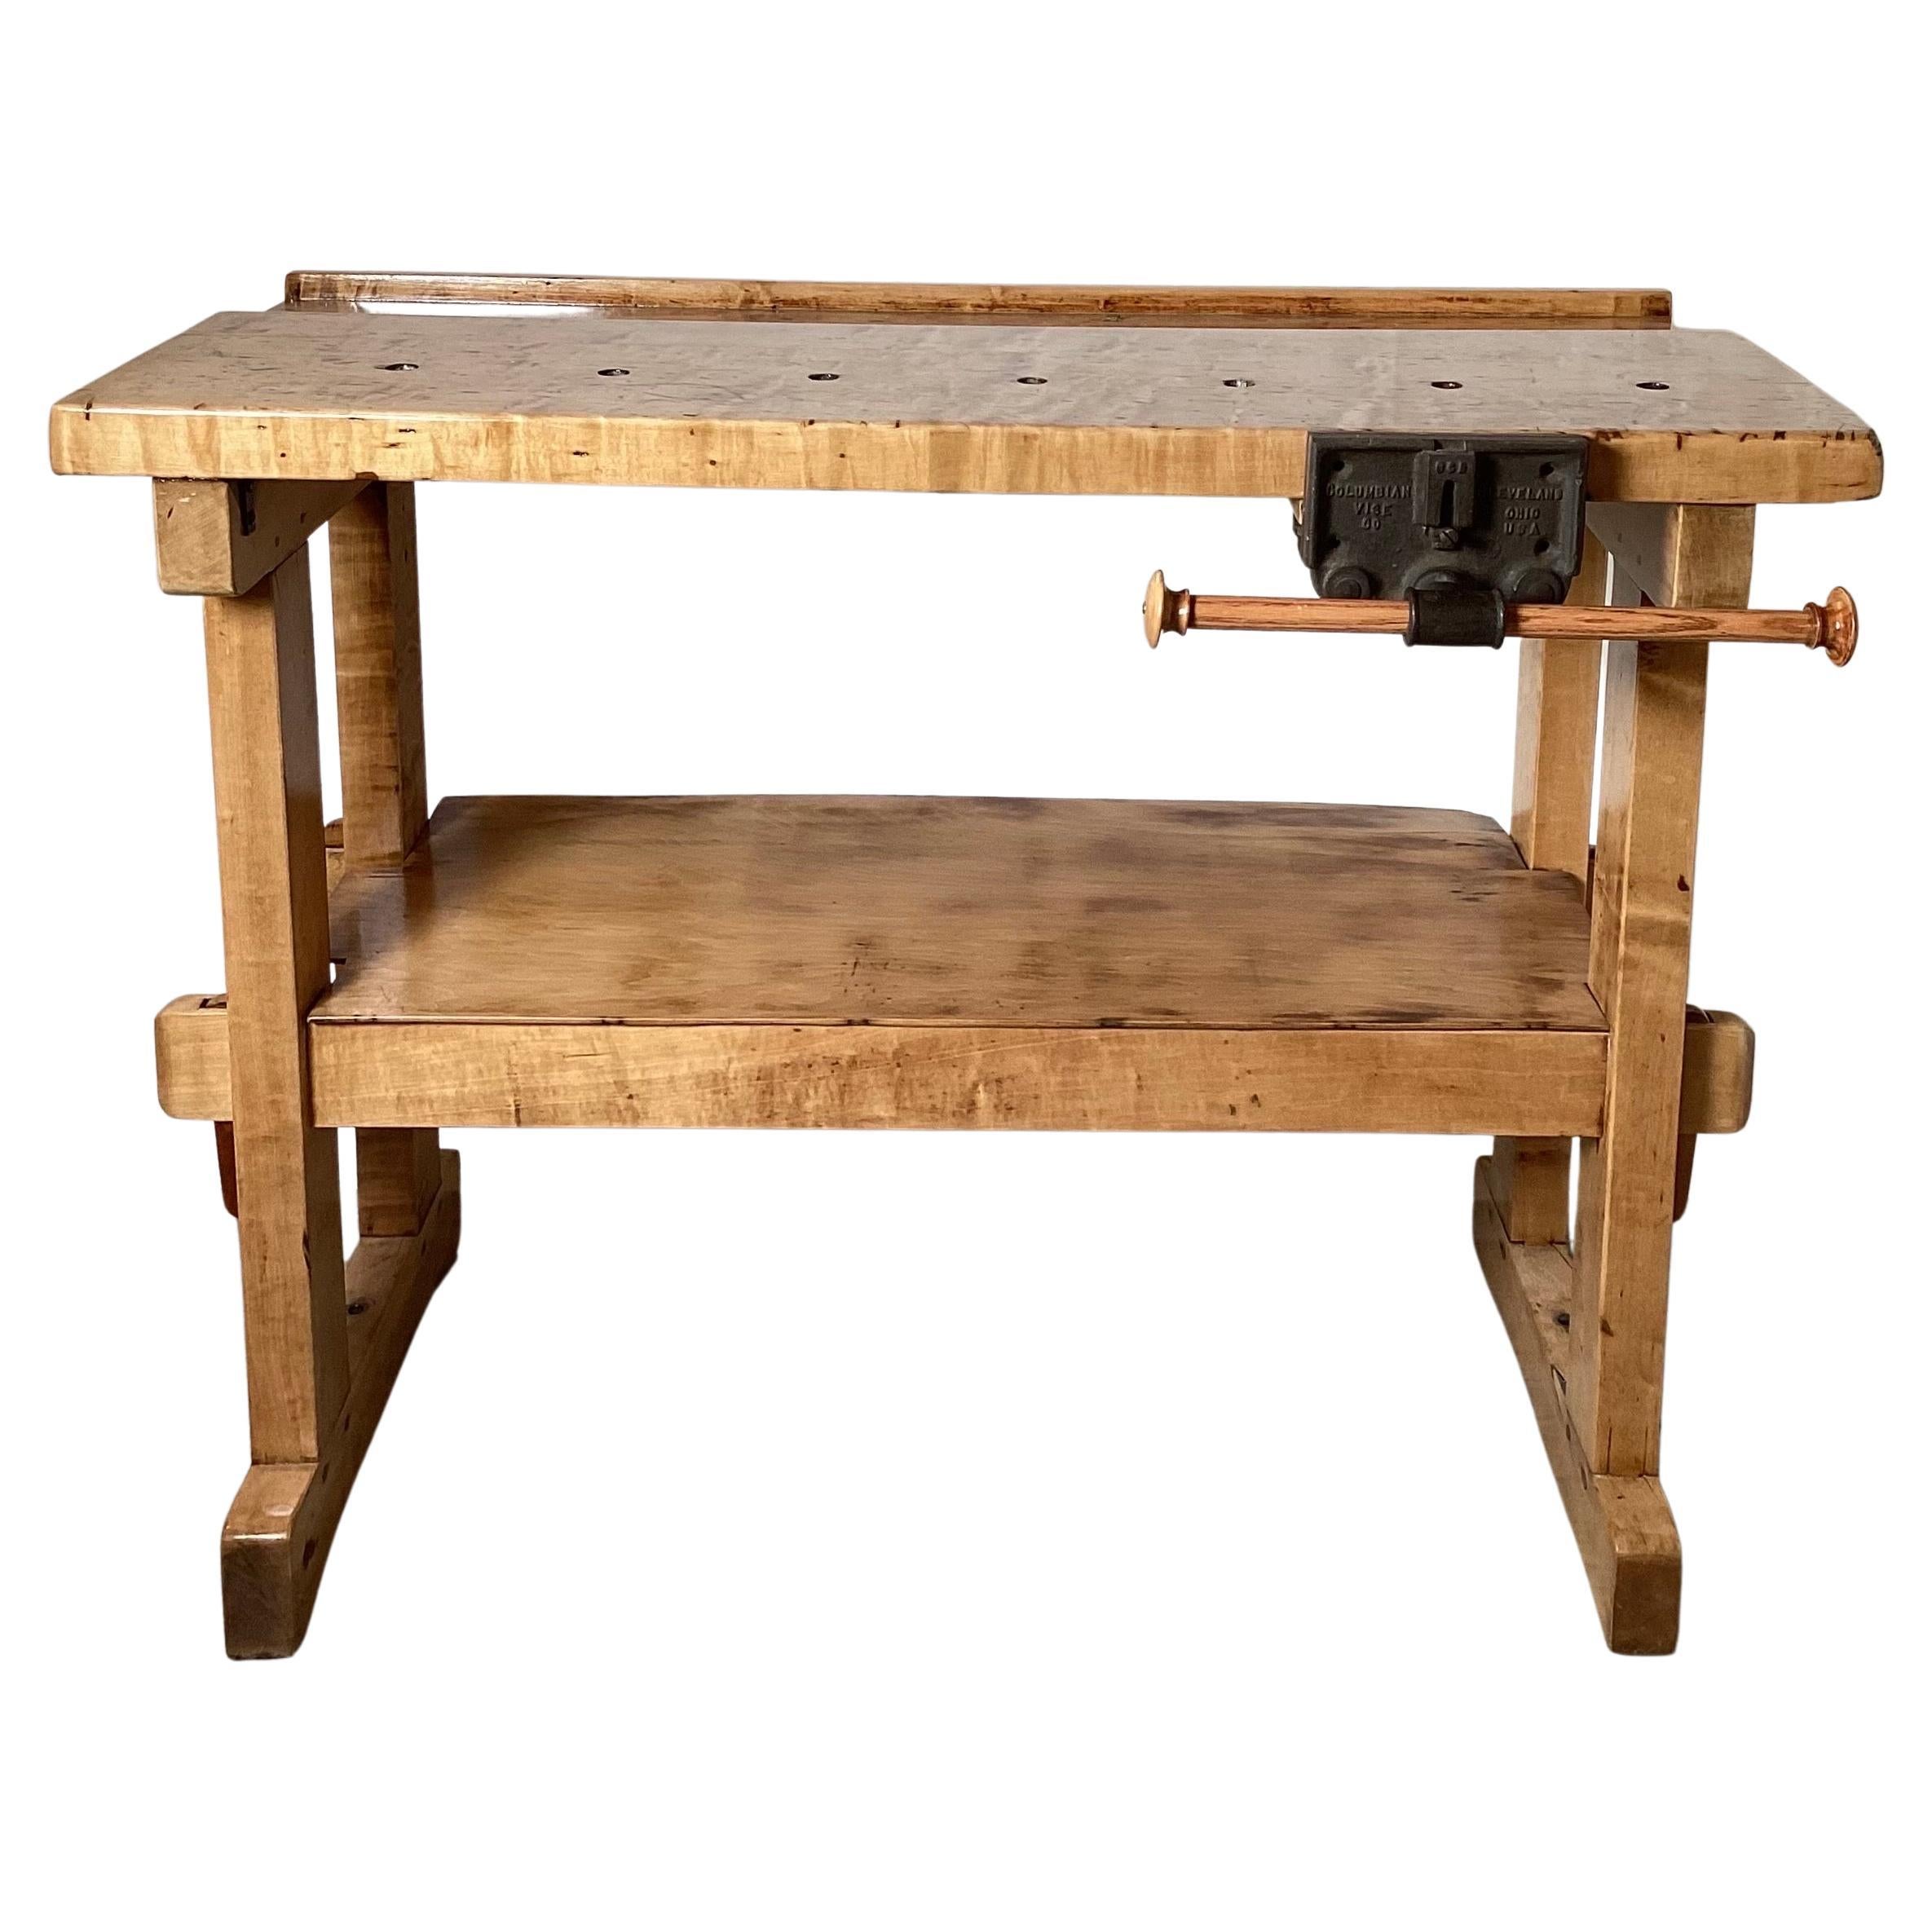 Early 20th Century Solid Maple Work Table For Sale